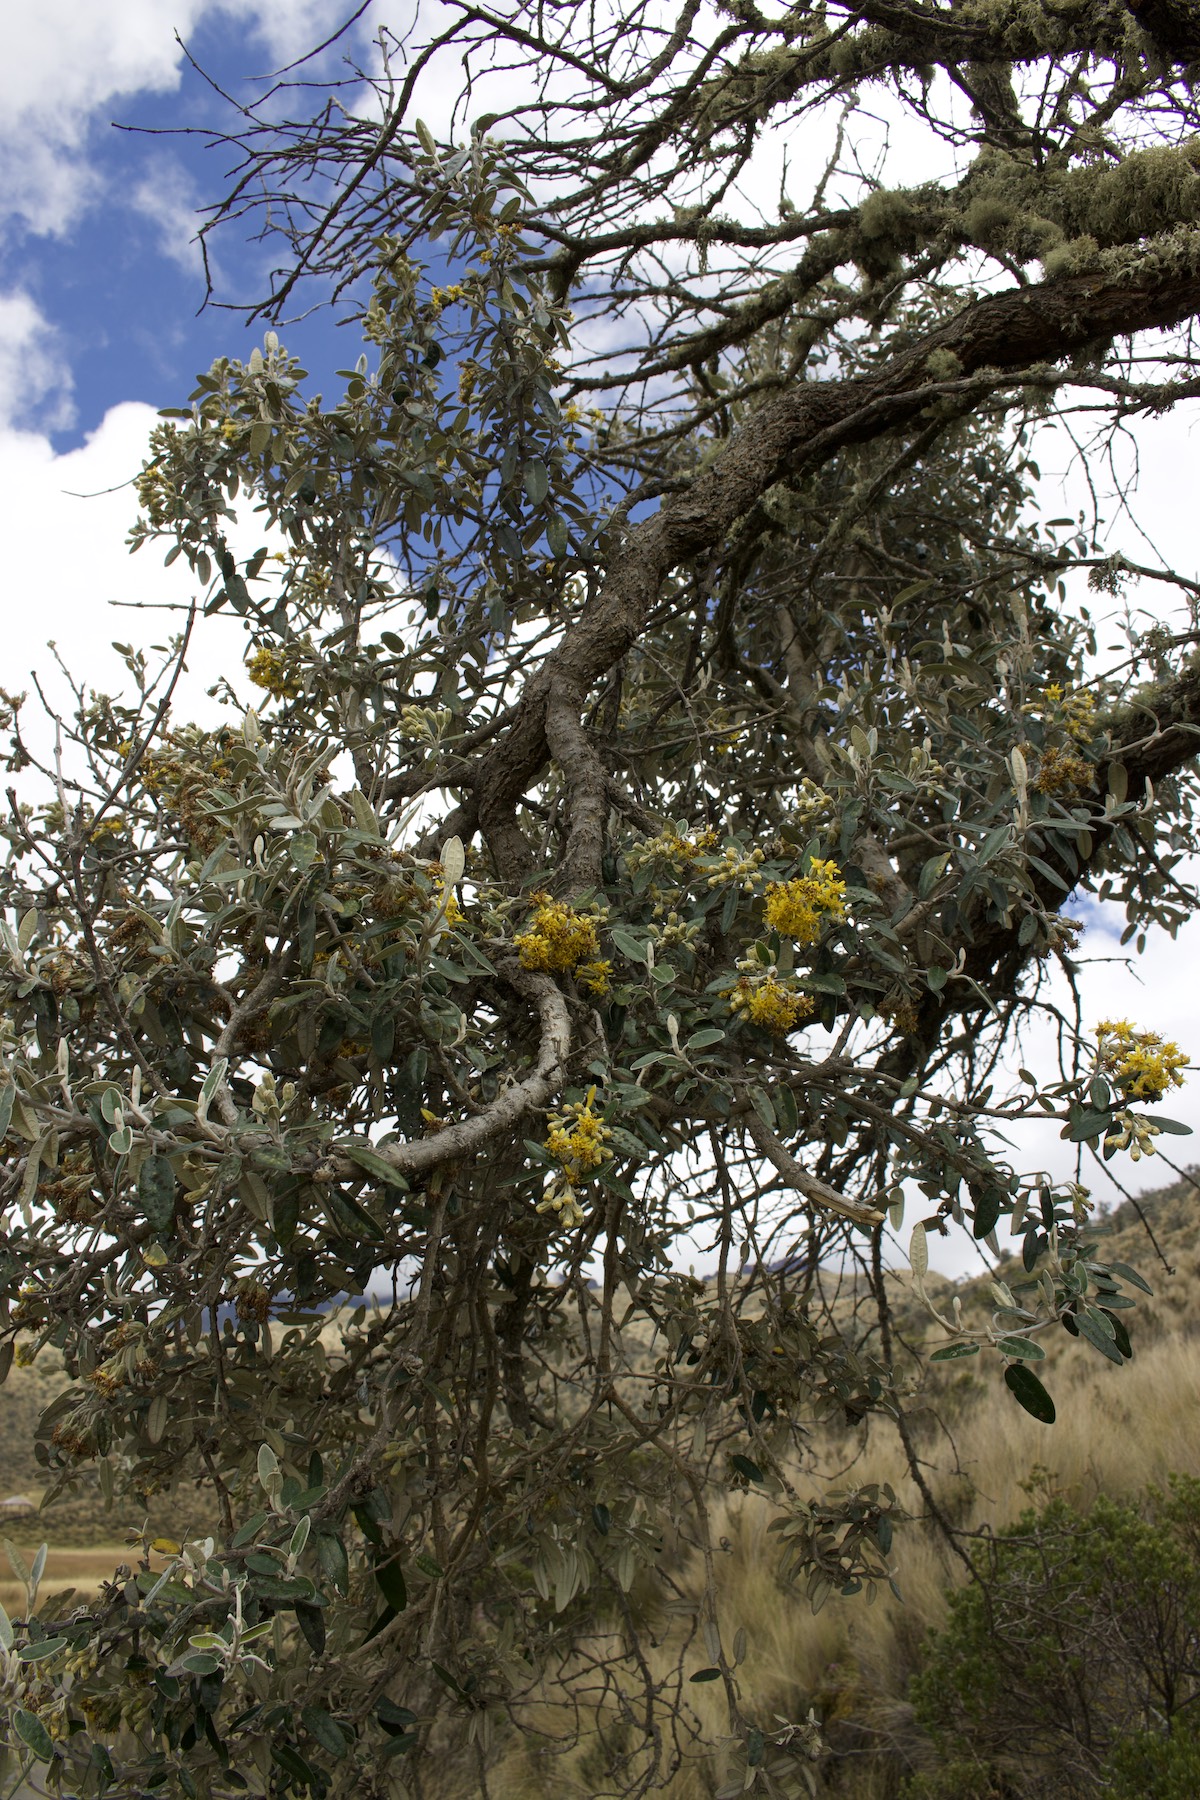 Plants in Cotopaxi National Park